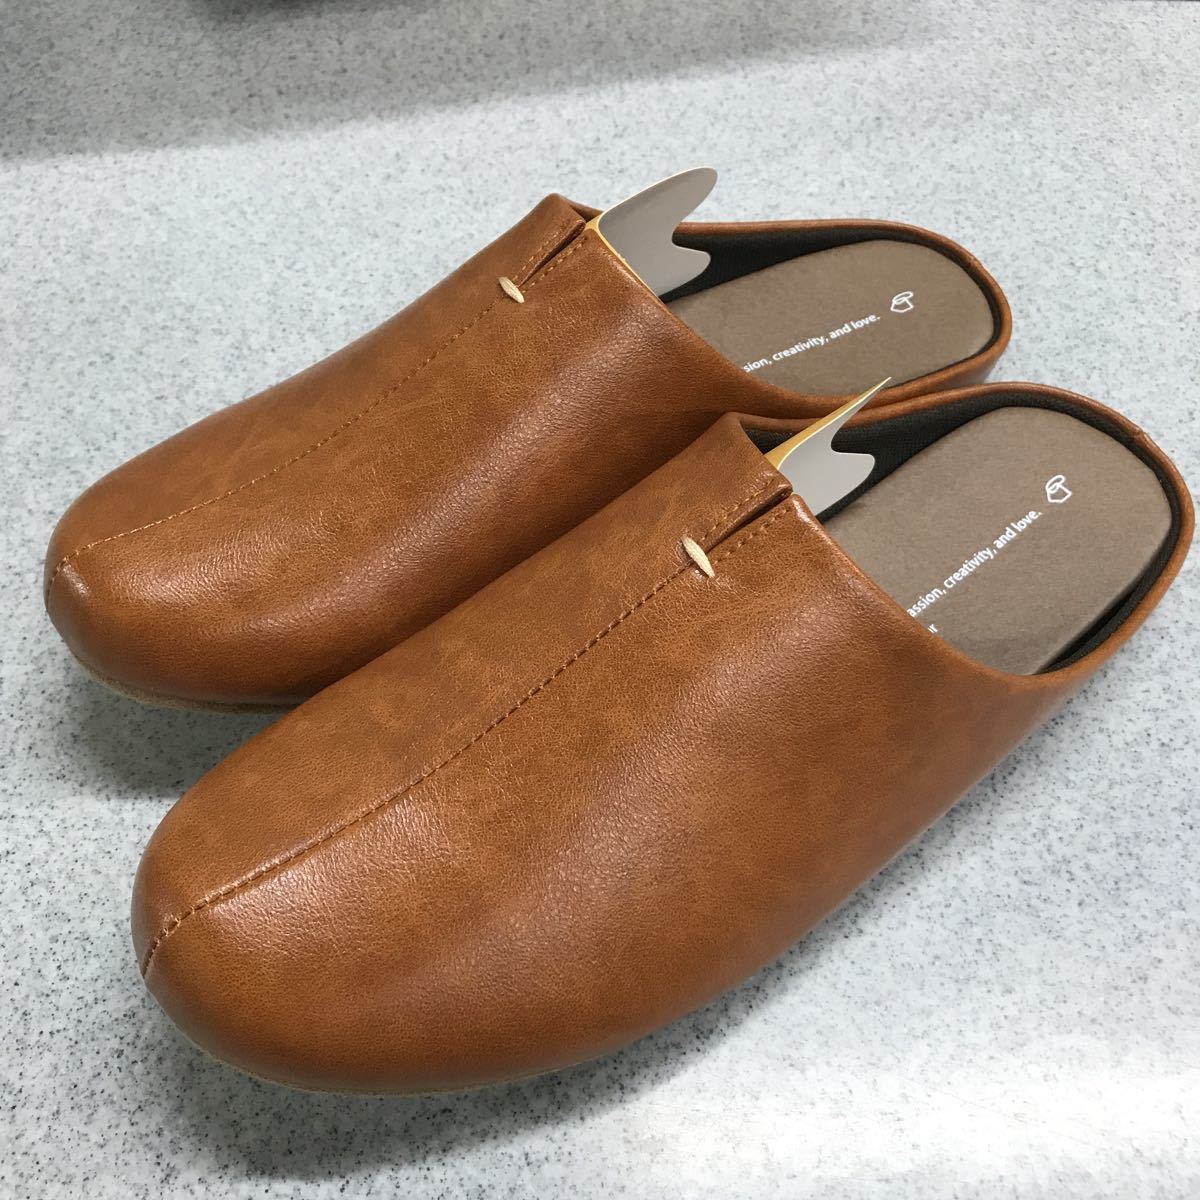  new goods slippers room zL size fake leather 25~27. for ( Camel ) slip prevention attaching free shipping 